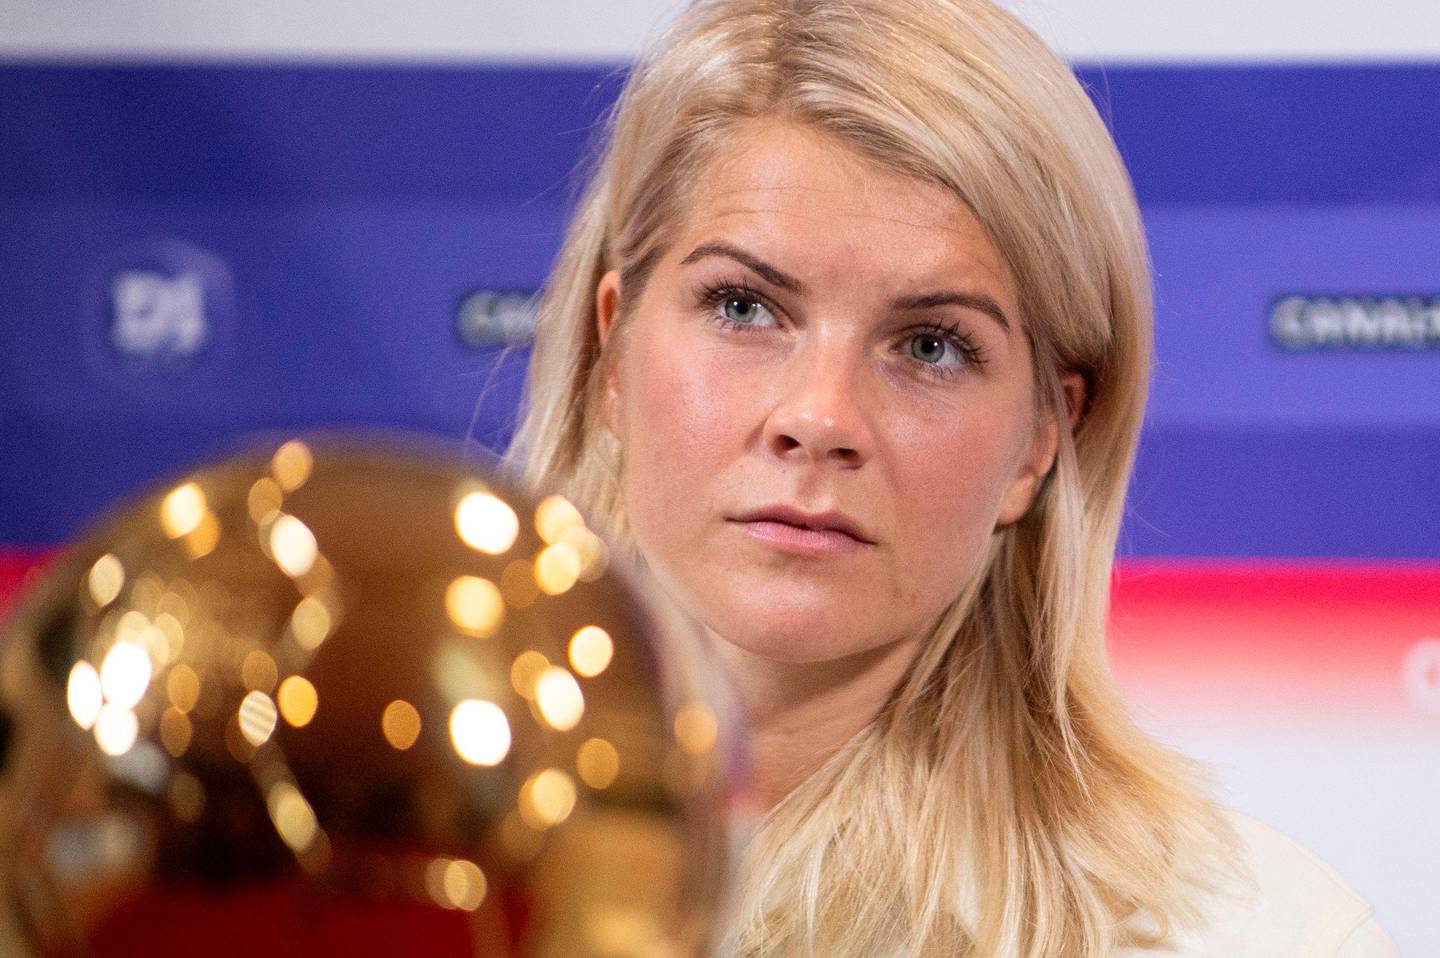 Lyon's Norwegian forward Ada Hegerberg, winner of 2018 Women's Ballon d'Or award for best player of the year, poses with the trophy during a press conference with Lyon's President at the Groupama training center in Lyon, central eastern France, on December 4, 2018. - Awarded the Golden Ball on December 3, Hegerberg is the first woman who won the price. (Photo by ROMAIN LAFABREGUE / AFP)